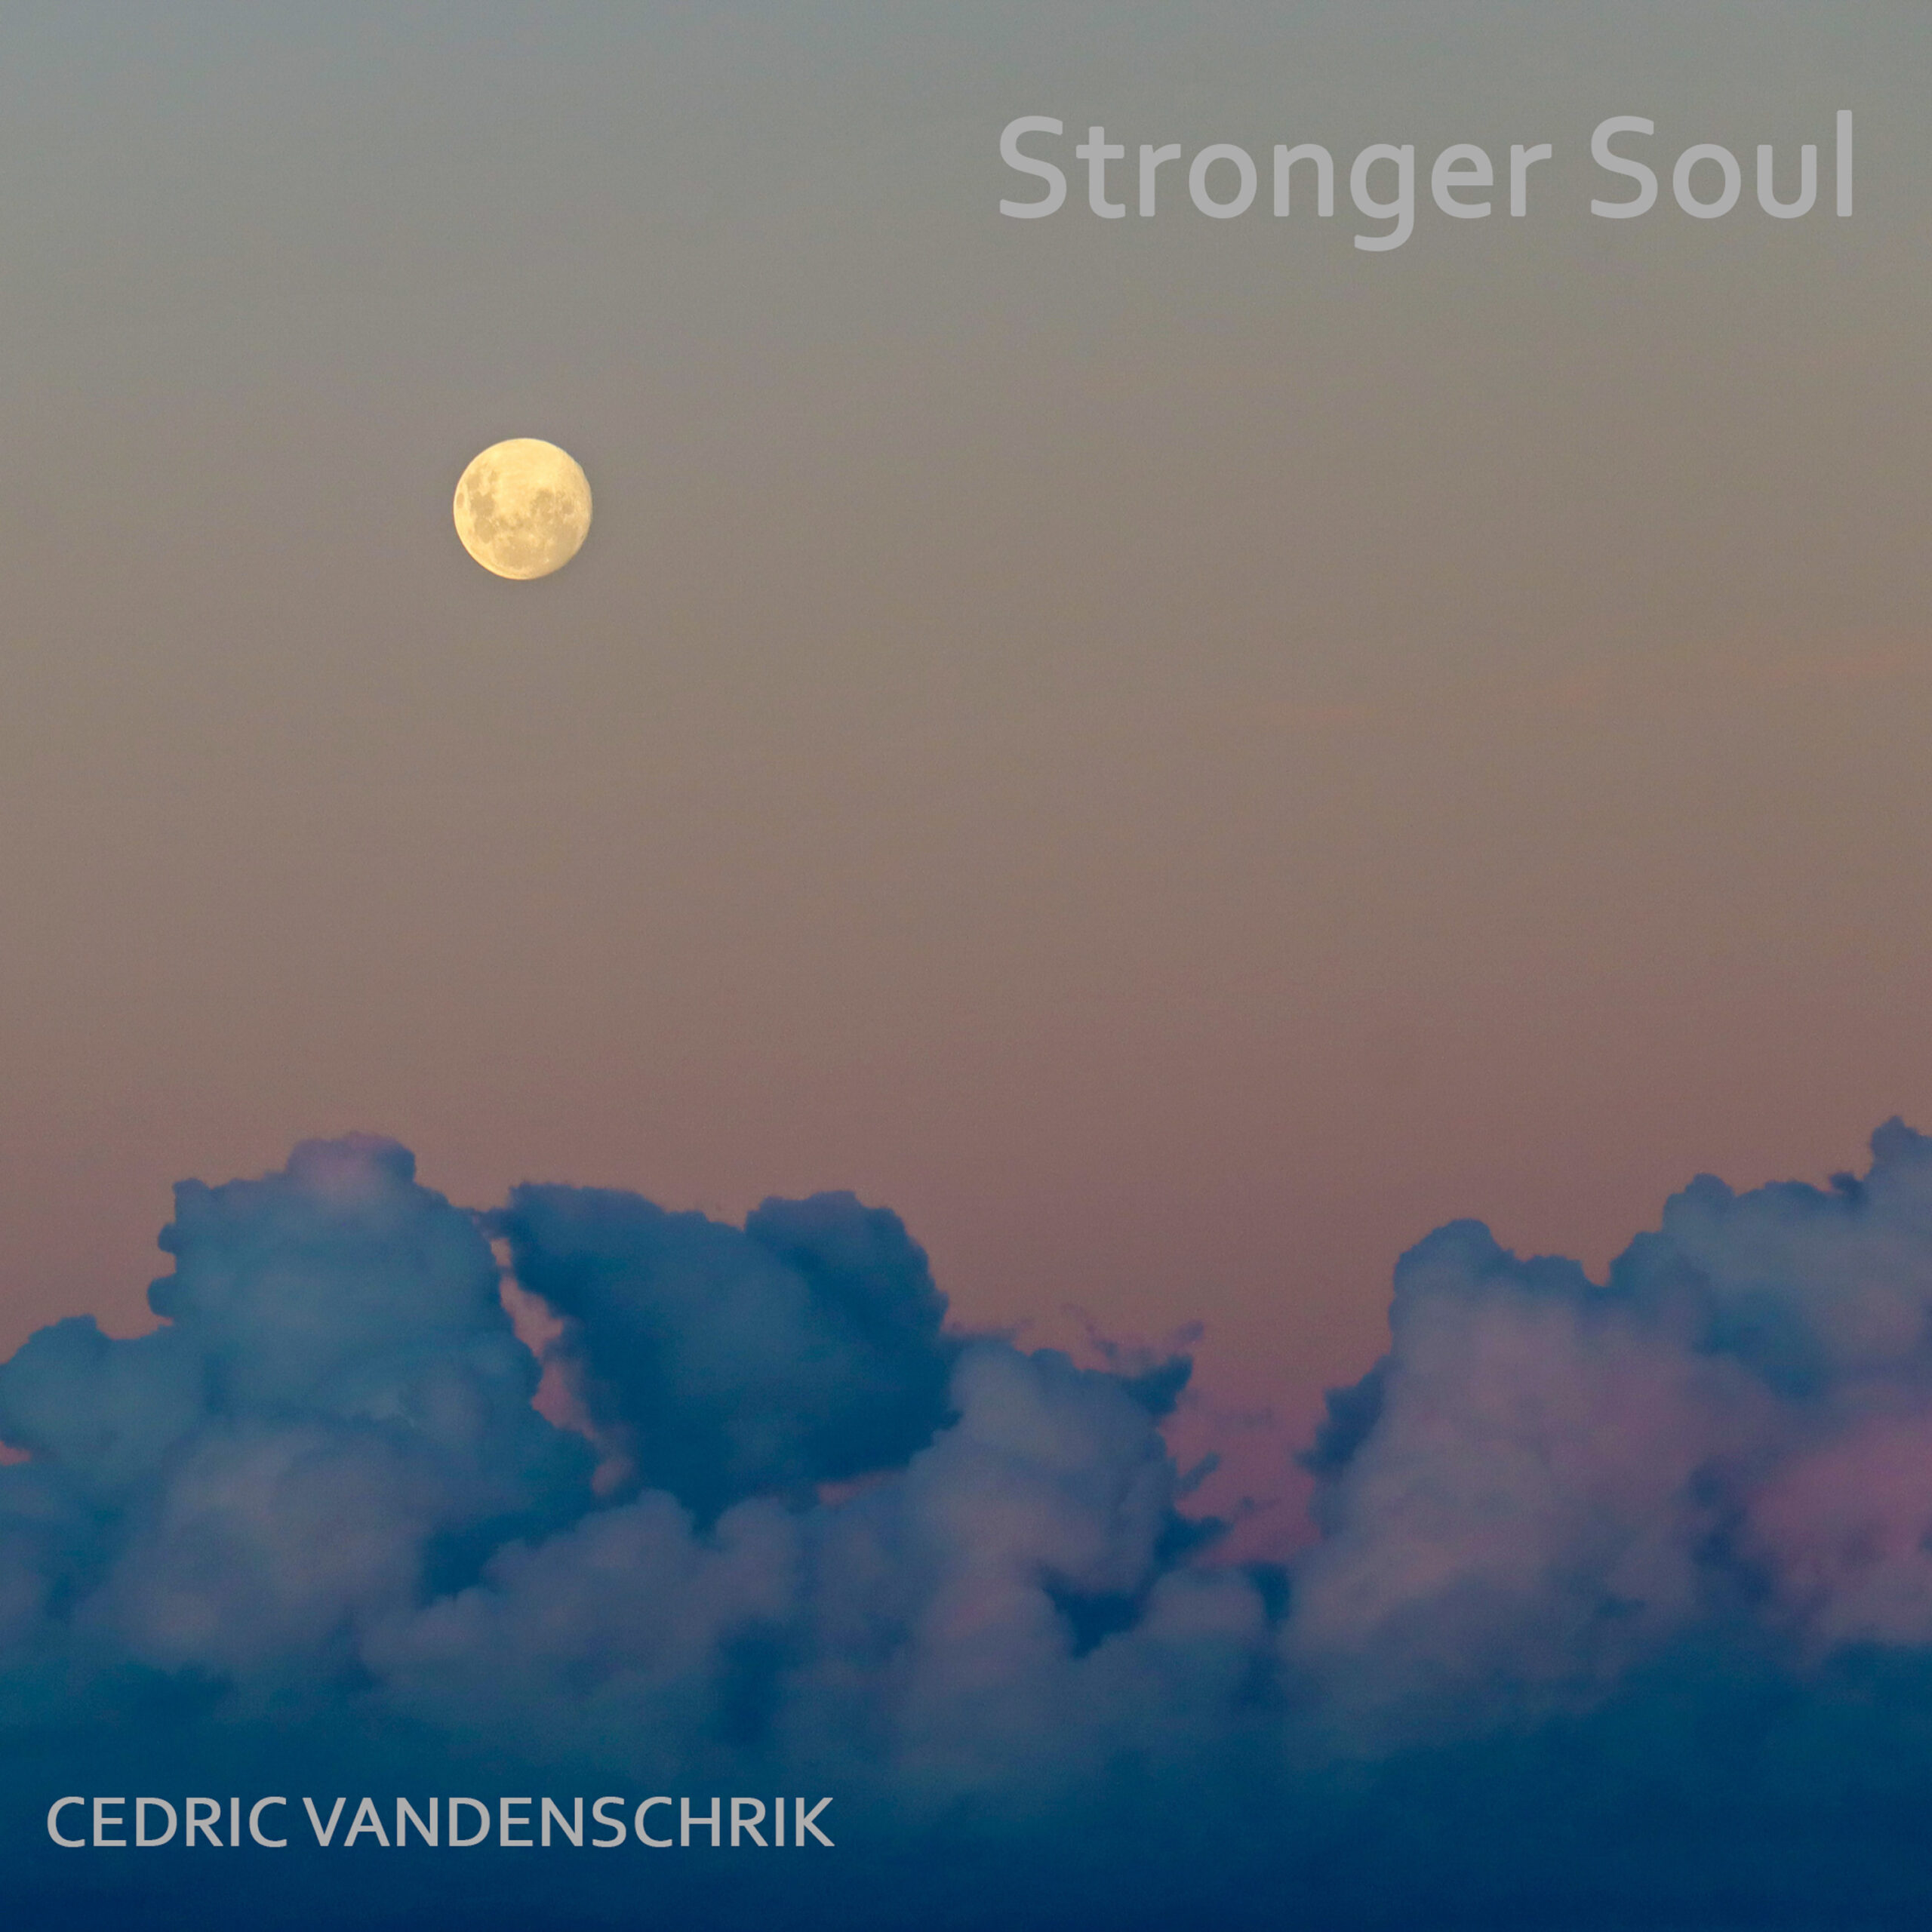 Moon over some clouds with writing: Stronger Soul - Cedric Vandenschrik